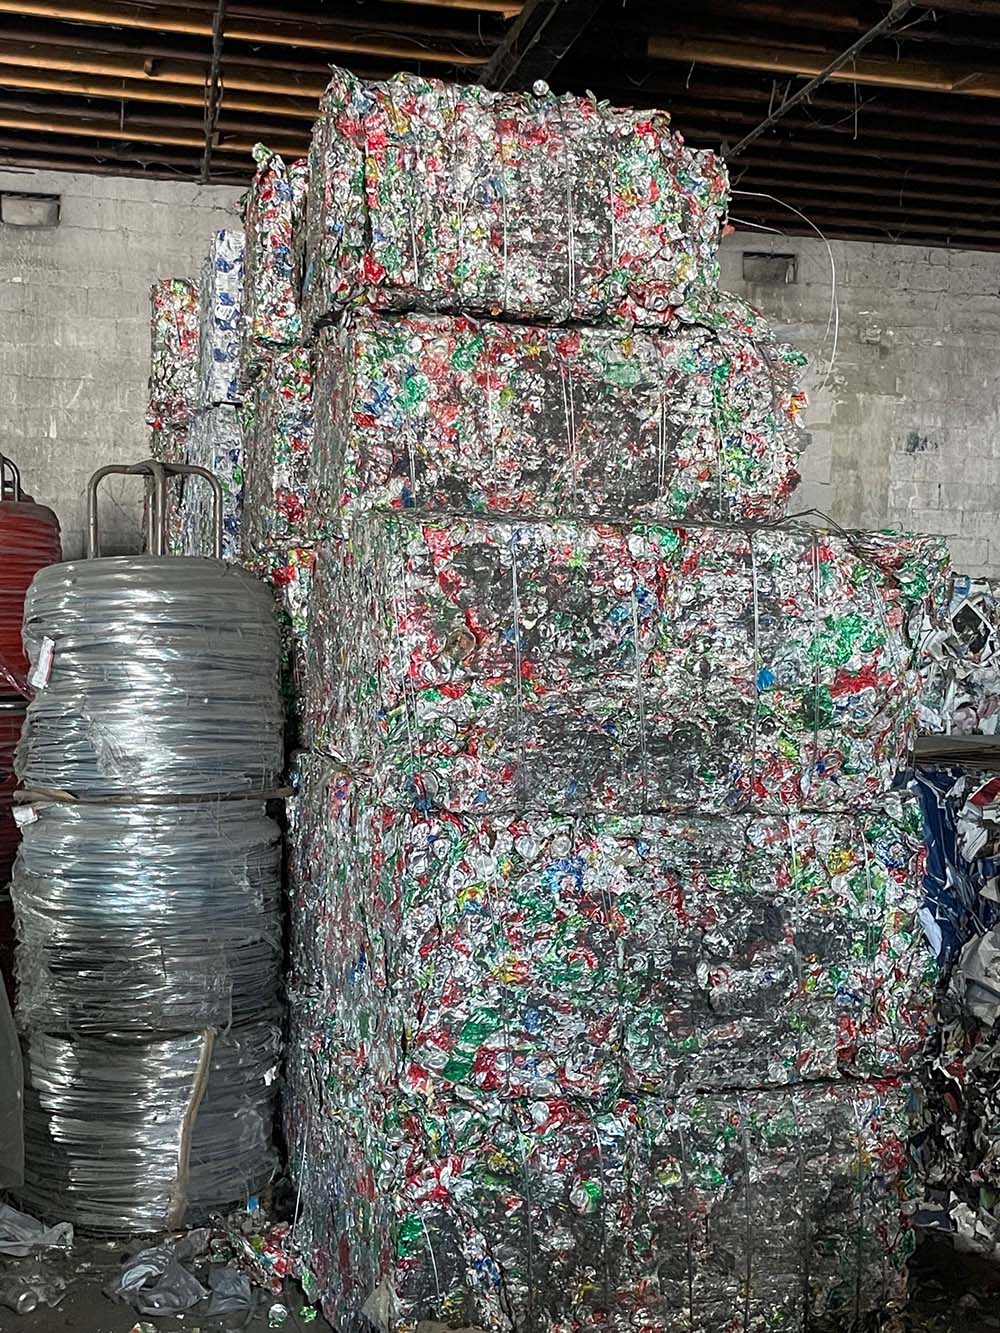 Miami Waste Paper - We recycle more than paper